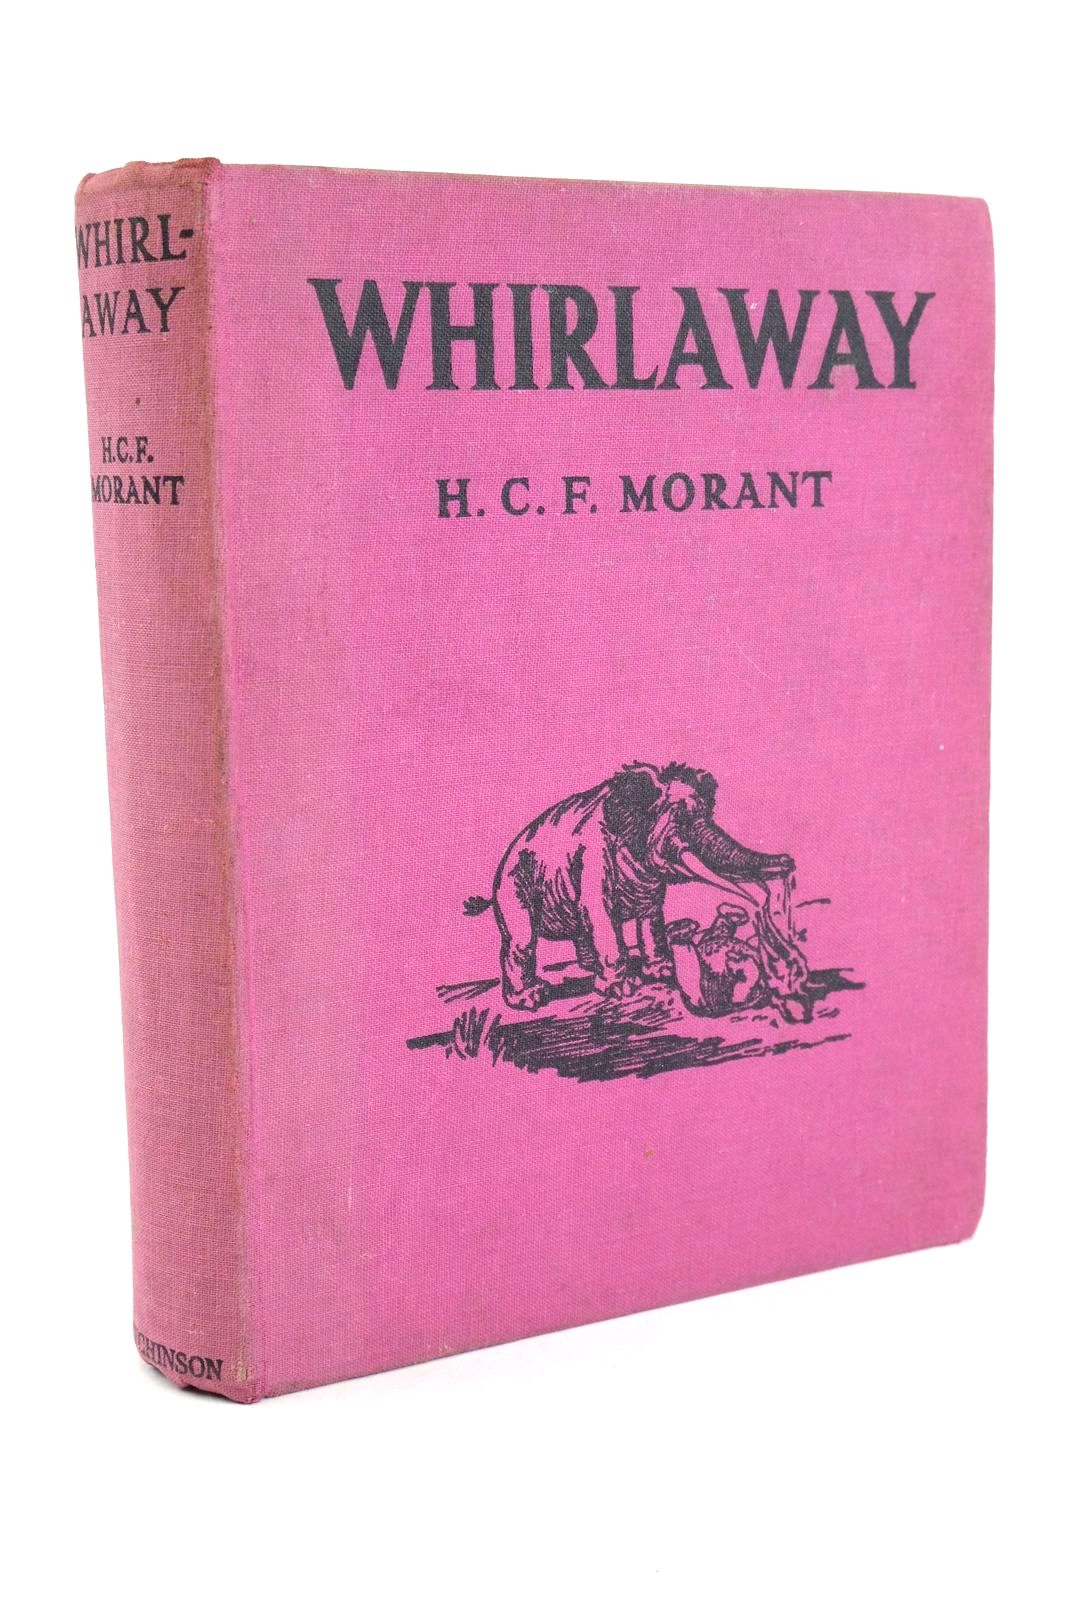 Photo of WHIRLAWAY: A STORY OF THE AGES written by Morant, H. C. F. illustrated by Elder, Jean published by Hutchinson (STOCK CODE: 1327686)  for sale by Stella & Rose's Books